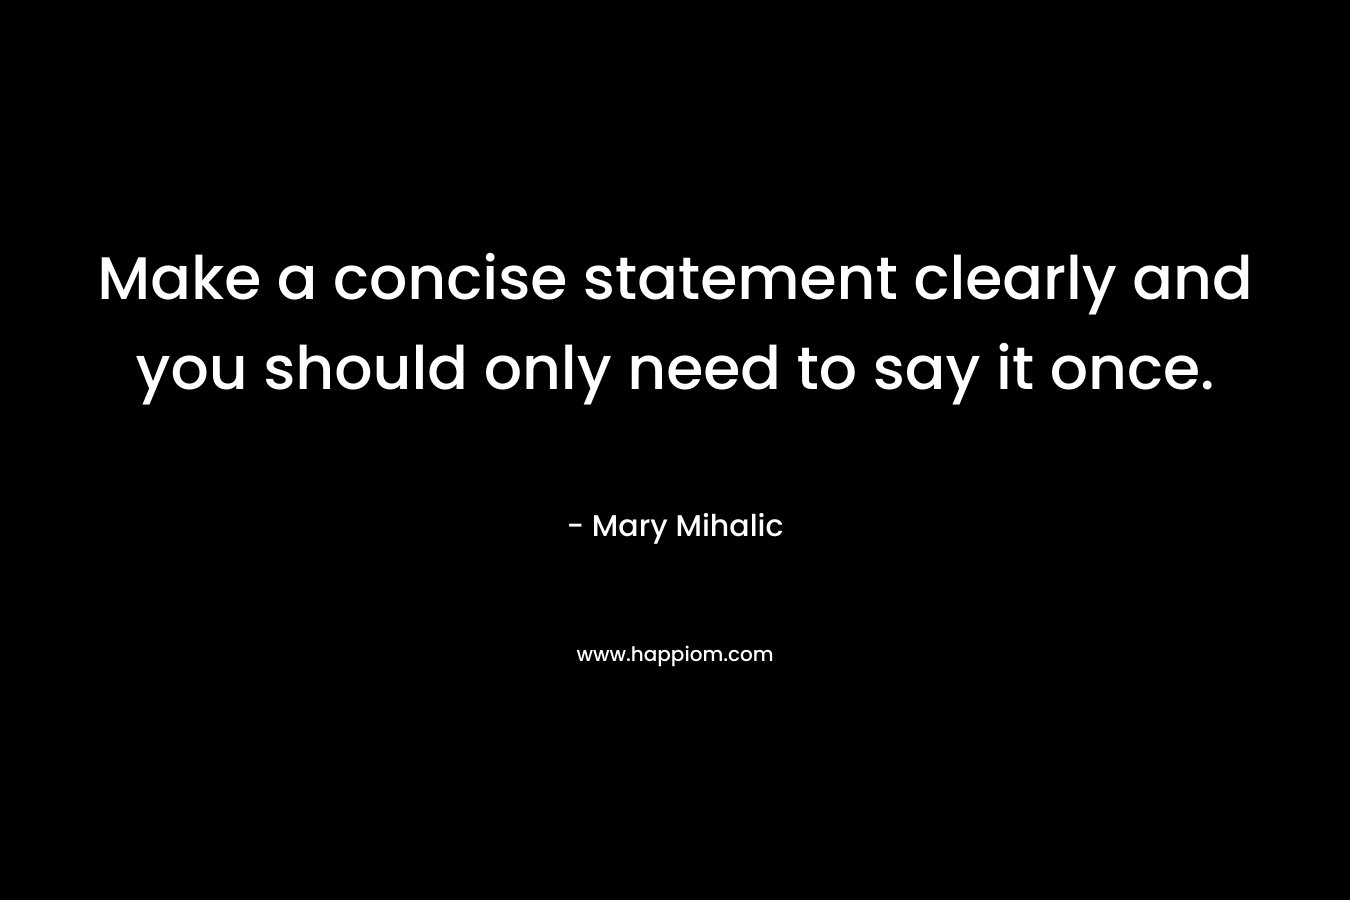 Make a concise statement clearly and you should only need to say it once. – Mary Mihalic